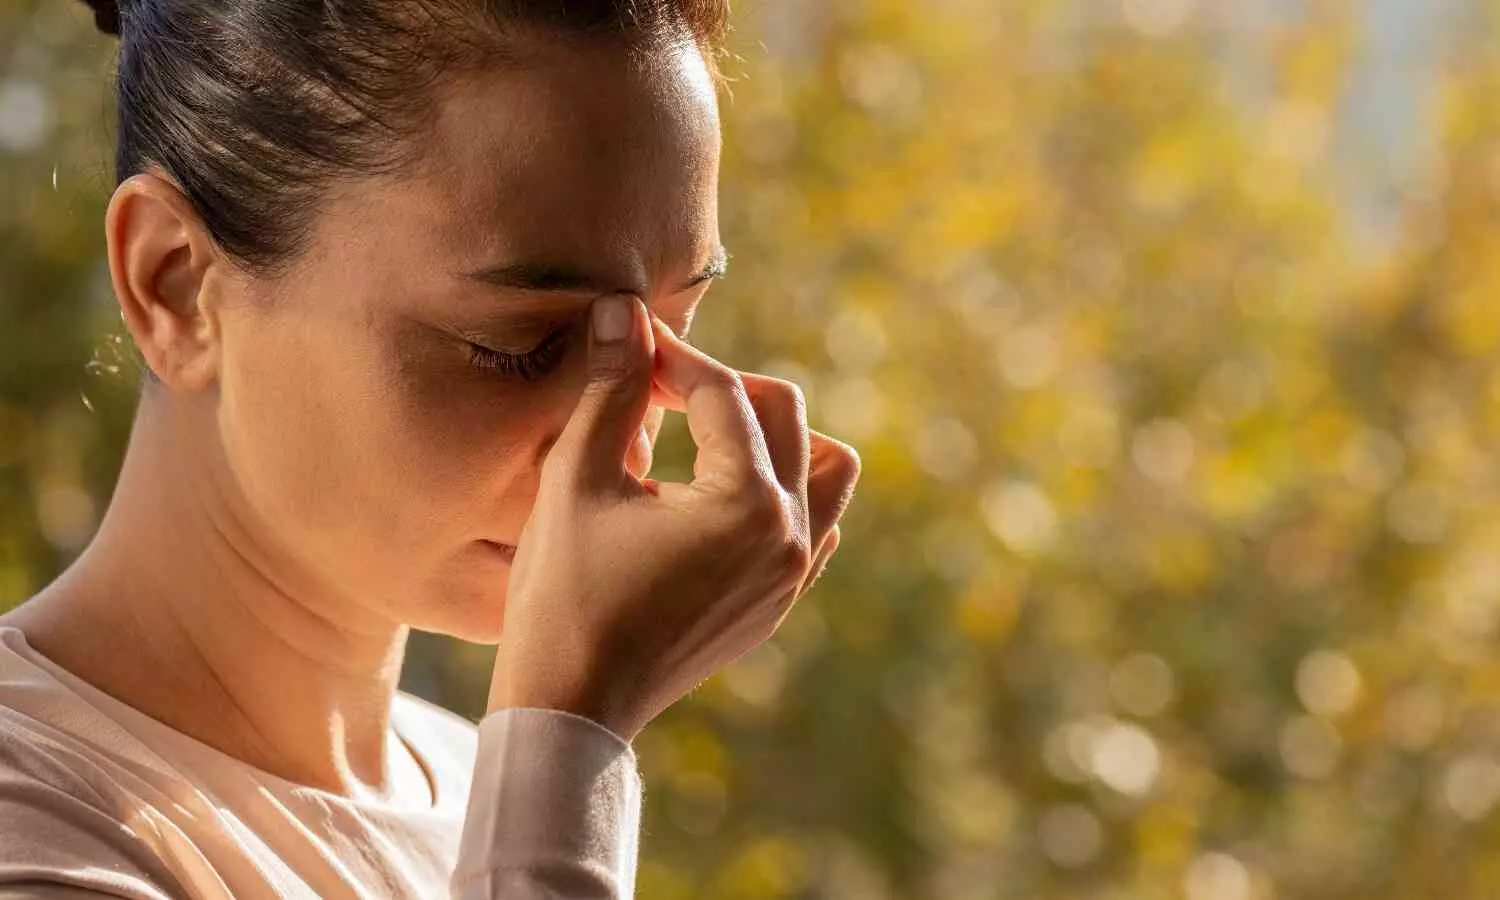 Researchers find that hot weather makes migraine sufferers more likely to get headaches